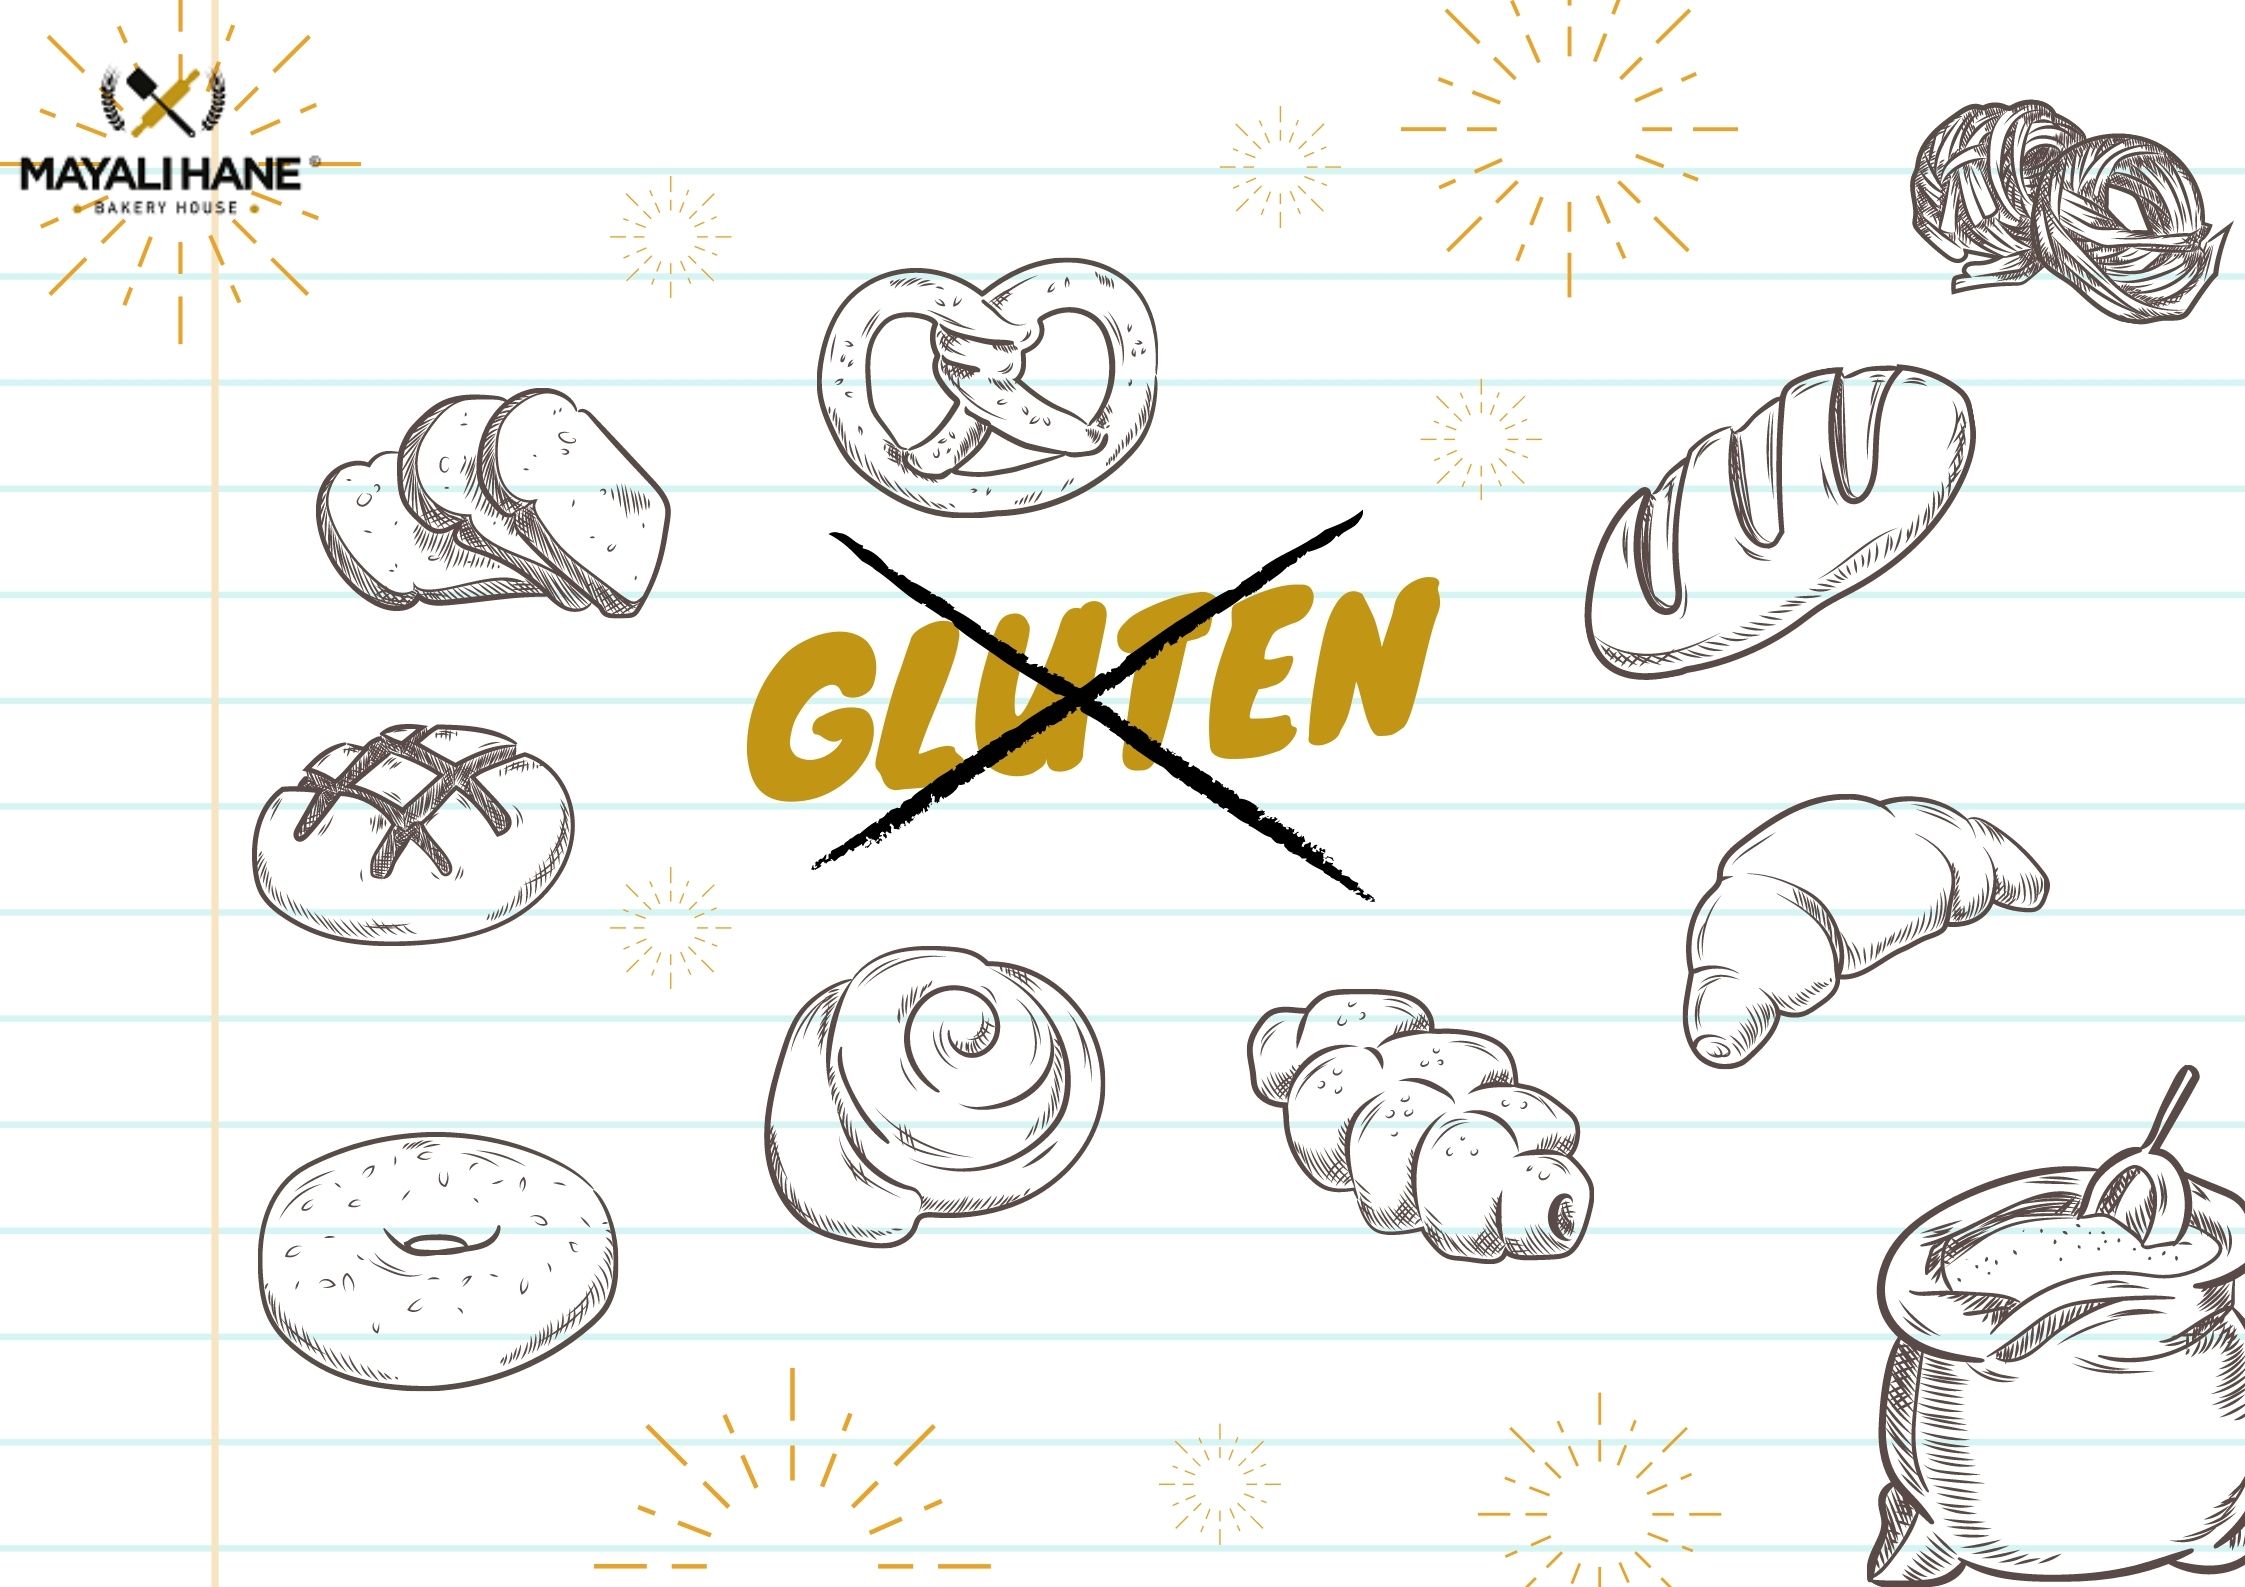 A HOPE FOR PEOPLE WITH GLUTEN SENSITIVITY